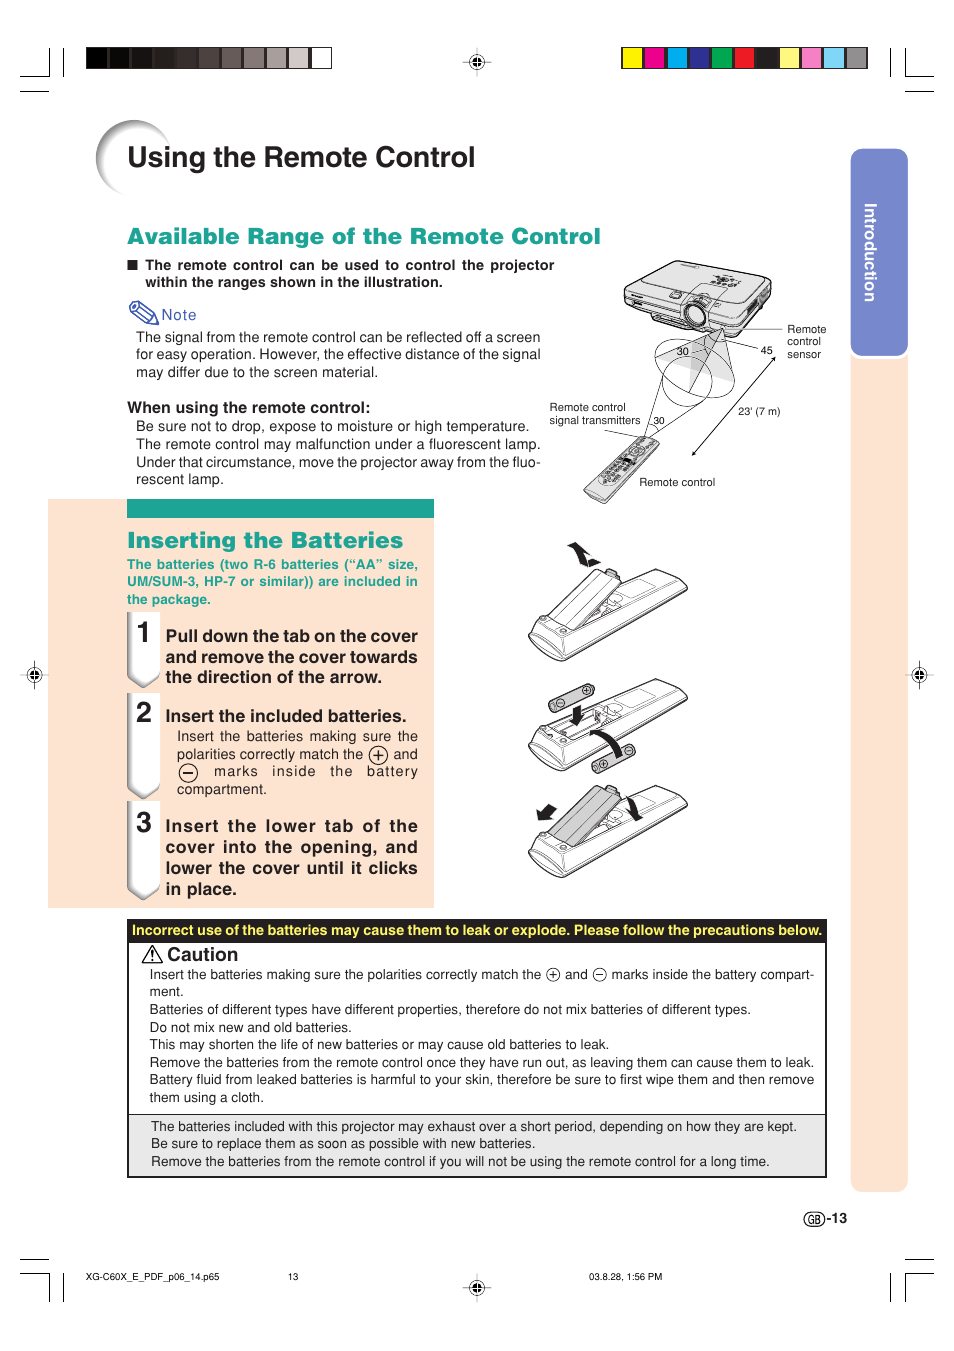 Using the remote control, Inserting the batteries, Available range of the remote control | Caution | Sharp XG-C60X User Manual | Page 17 / 106